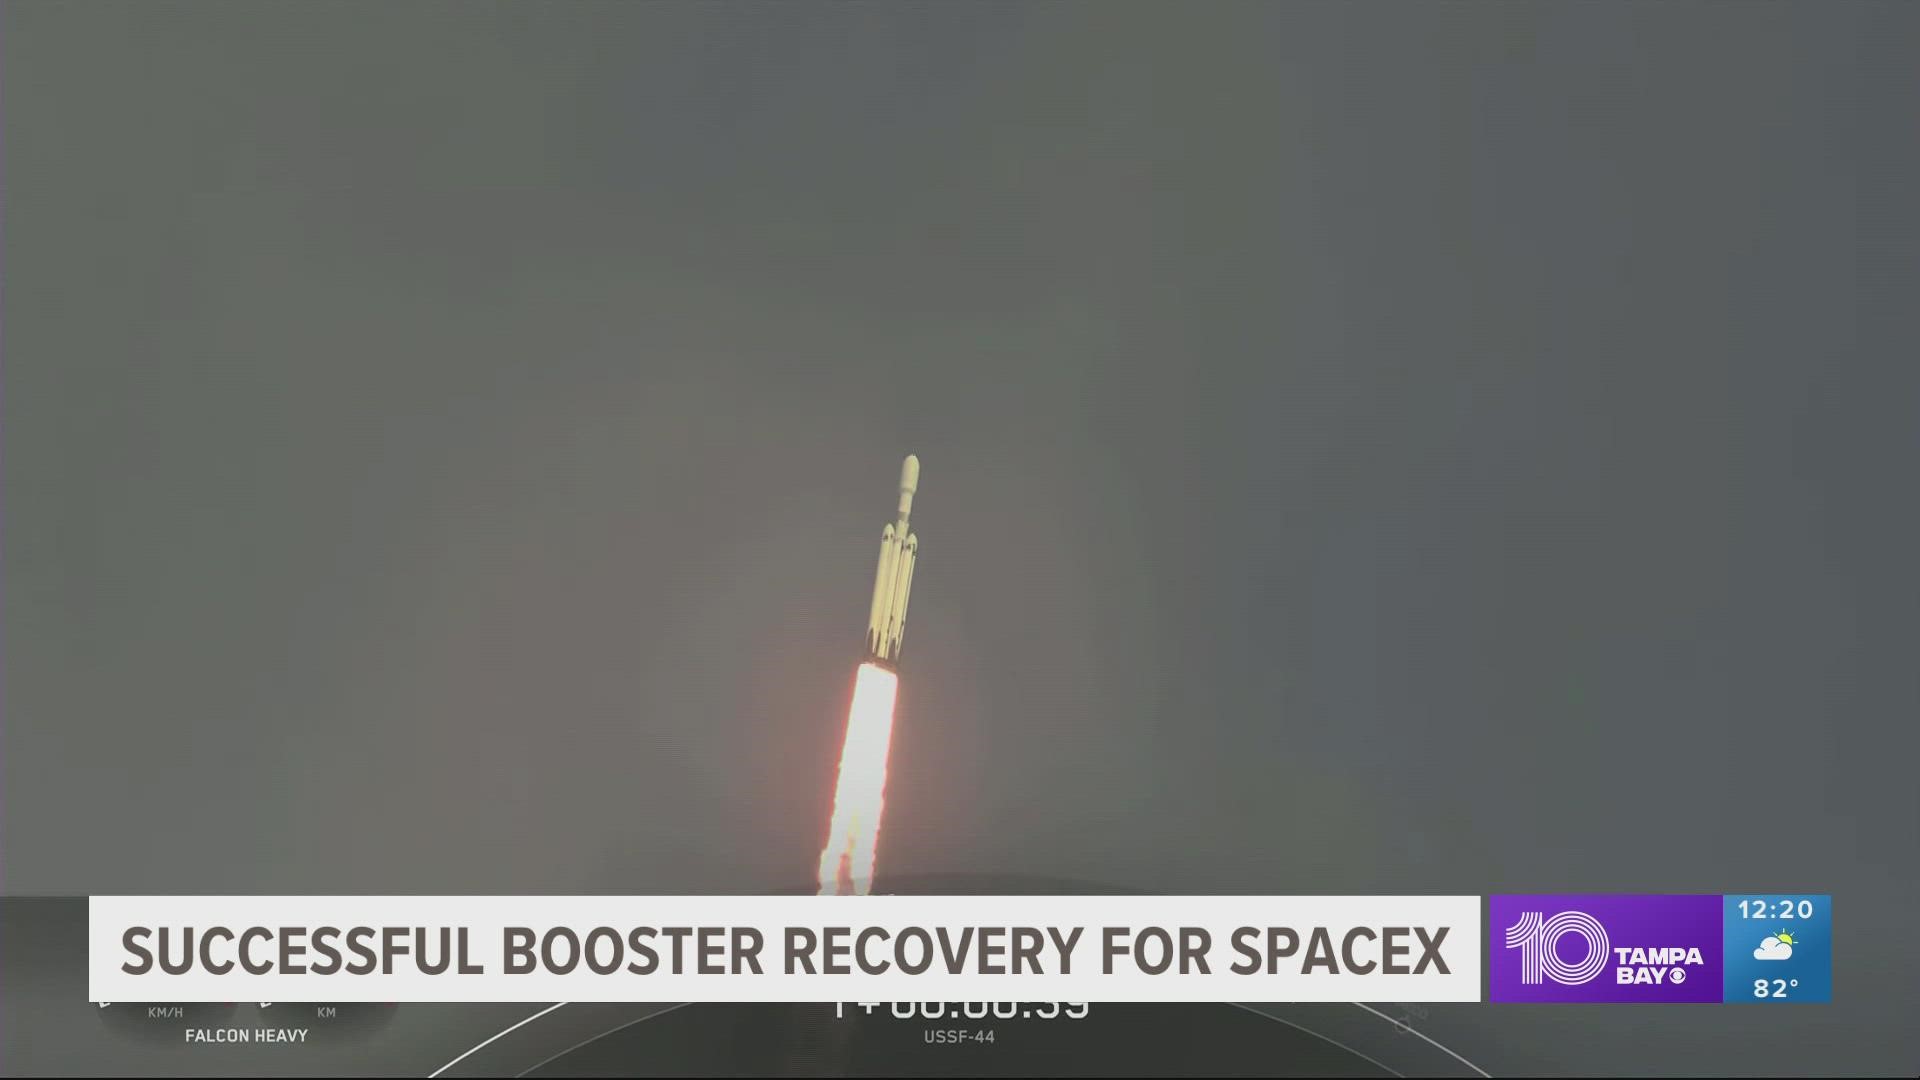 The mission of this launch was to deploy two spacecraft payloads directly into geosynchronous orbit.